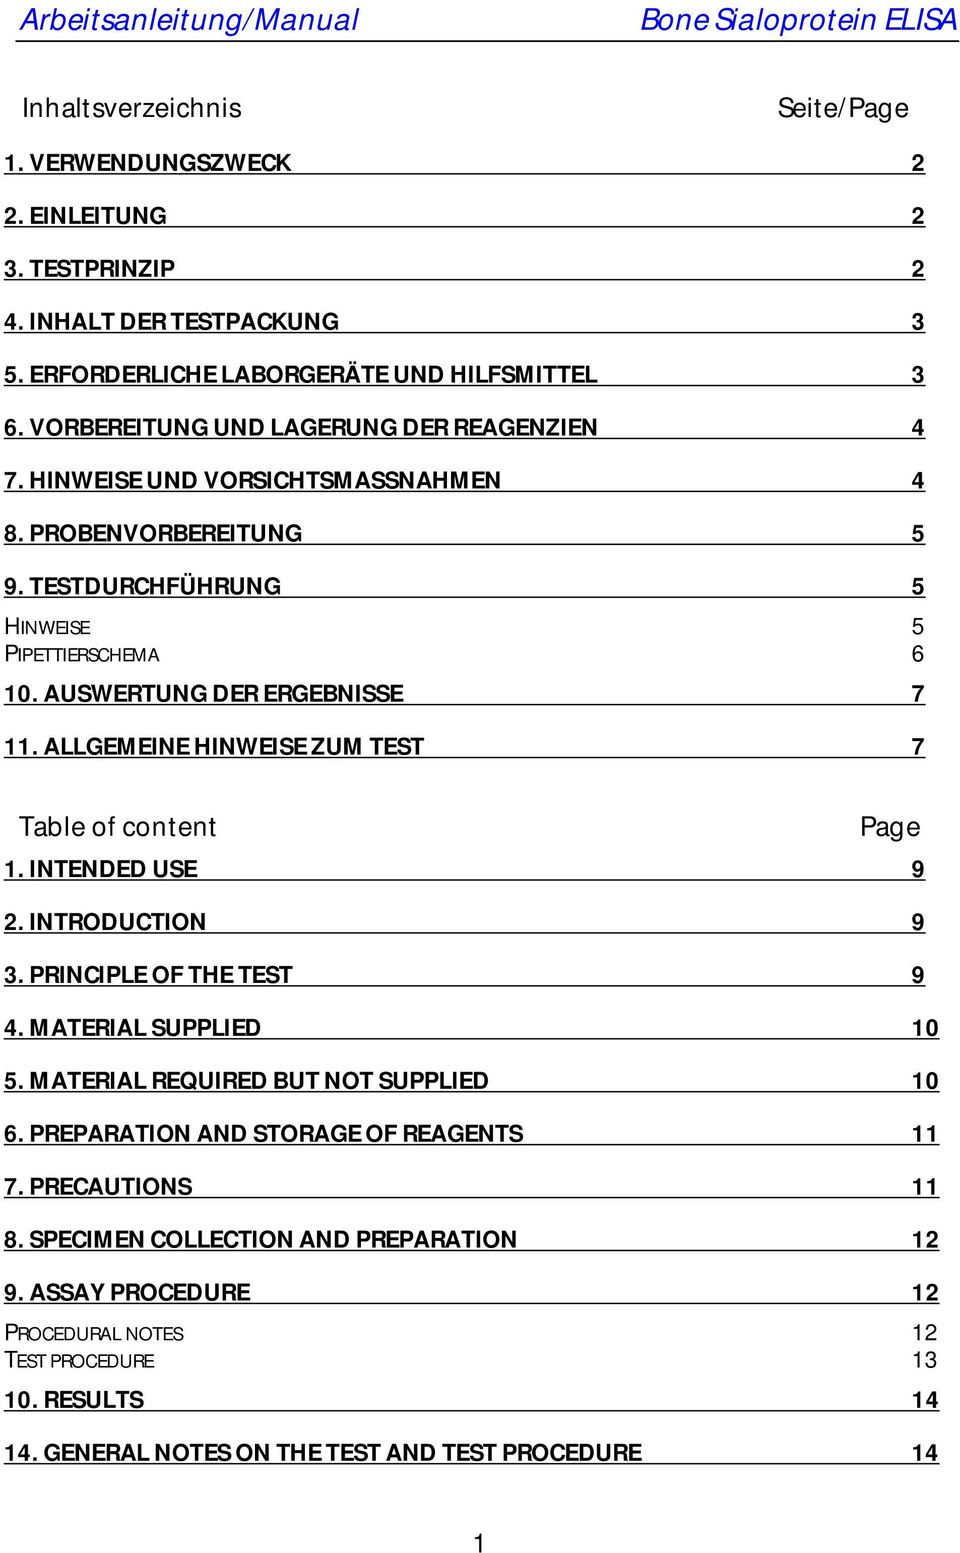 ALLGEMEINE HINWEISE ZUM TEST 7 Table of content Page 1. INTENDED USE 9 2. INTRODUCTION 9 3. PRINCIPLE OF THE TEST 9 4. MATERIAL SUPPLIED 10 5. MATERIAL REQUIRED BUT NOT SUPPLIED 10 6.